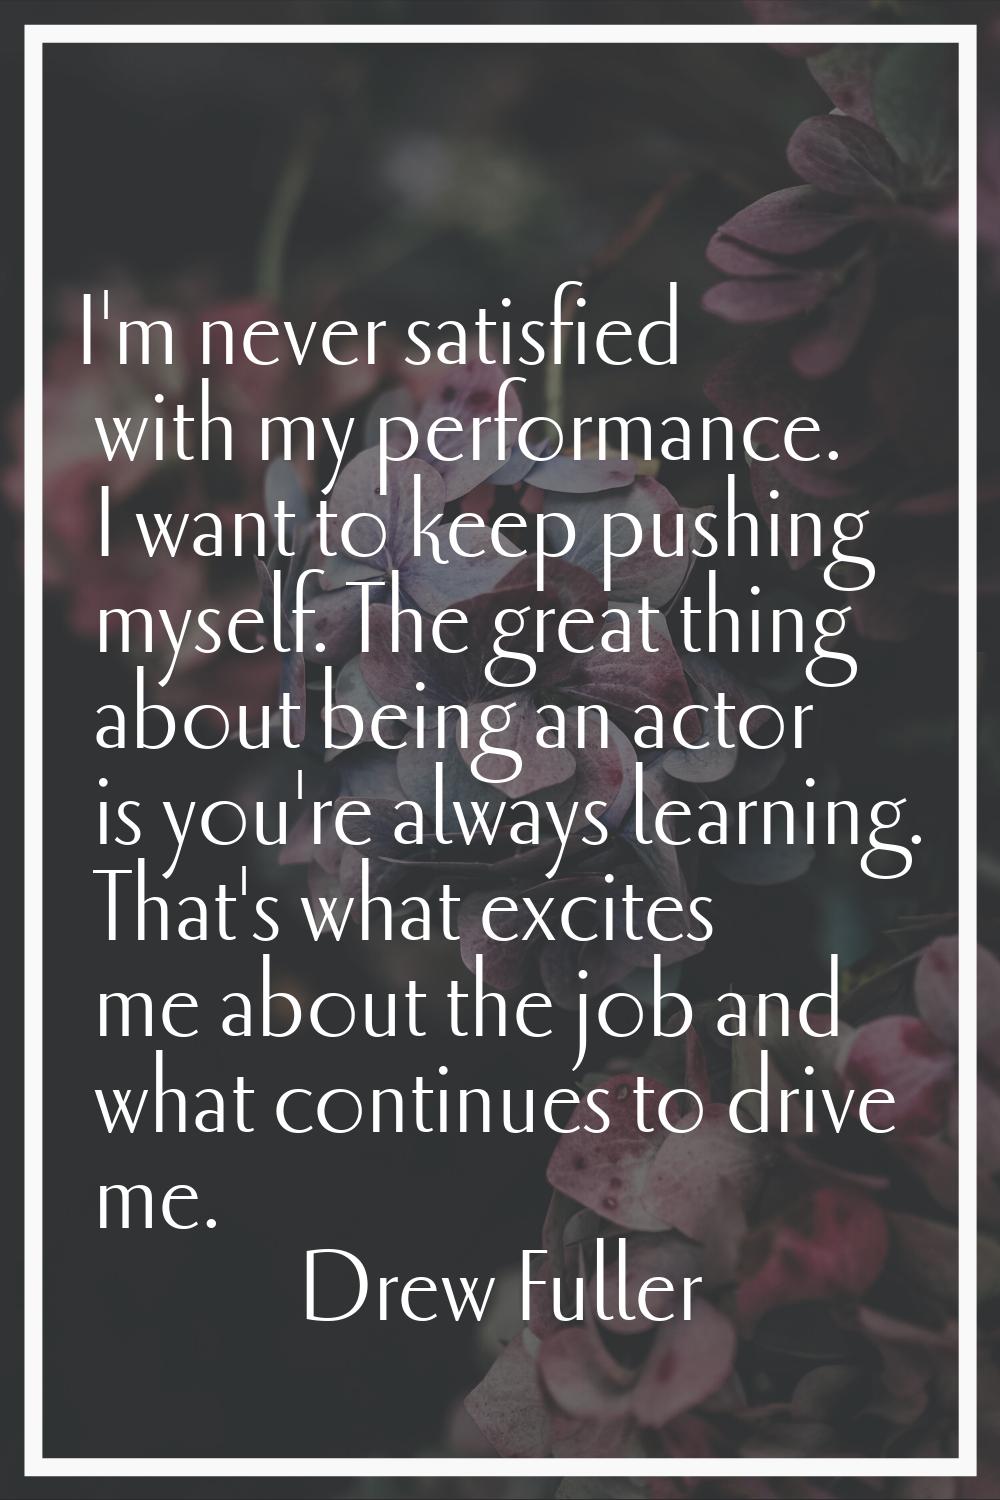 I'm never satisfied with my performance. I want to keep pushing myself. The great thing about being